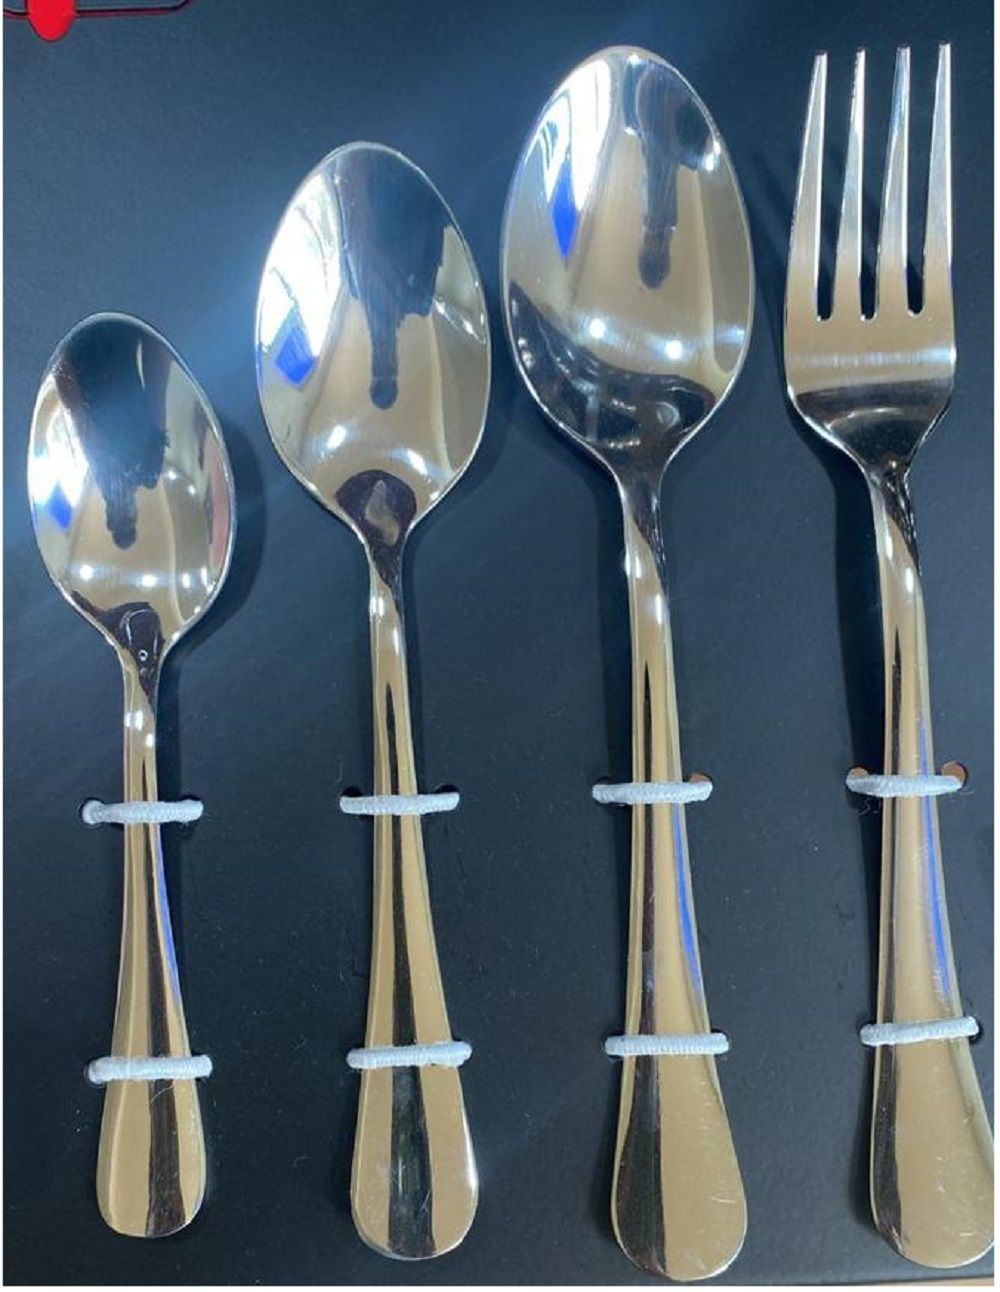 Stainless Steel Cutlery Set